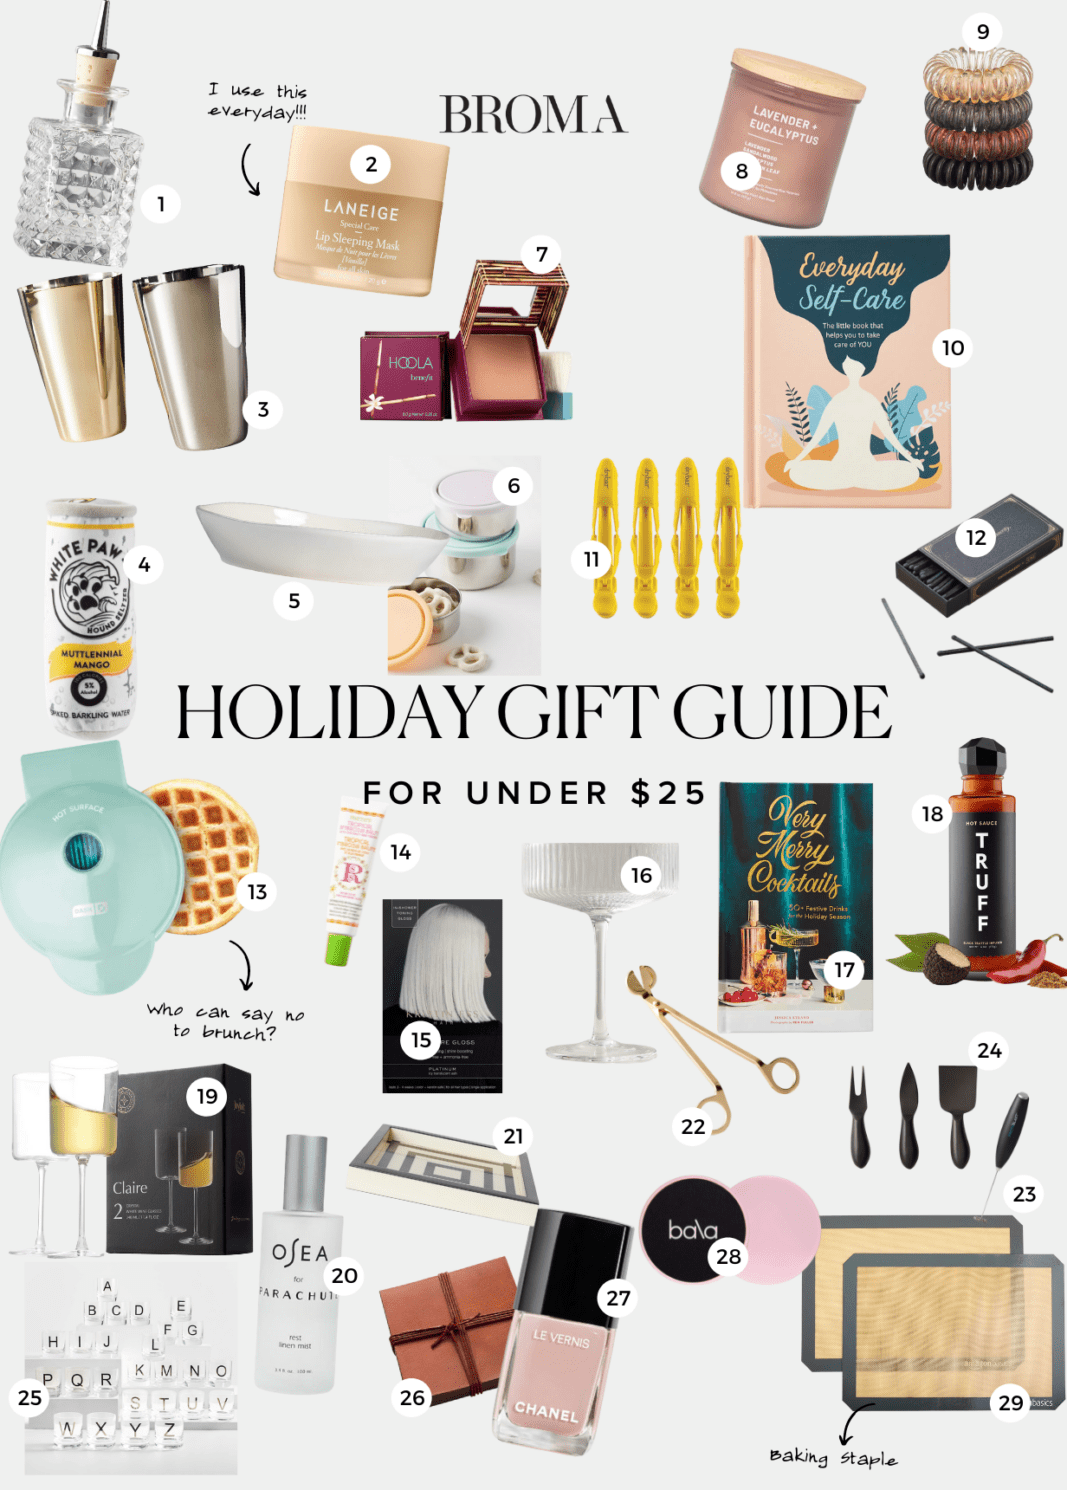 37 Stocking Stuffers Under $25 Gift Guide 2023, Holiday Recipes: Menus,  Desserts, Party Ideas from Food Network